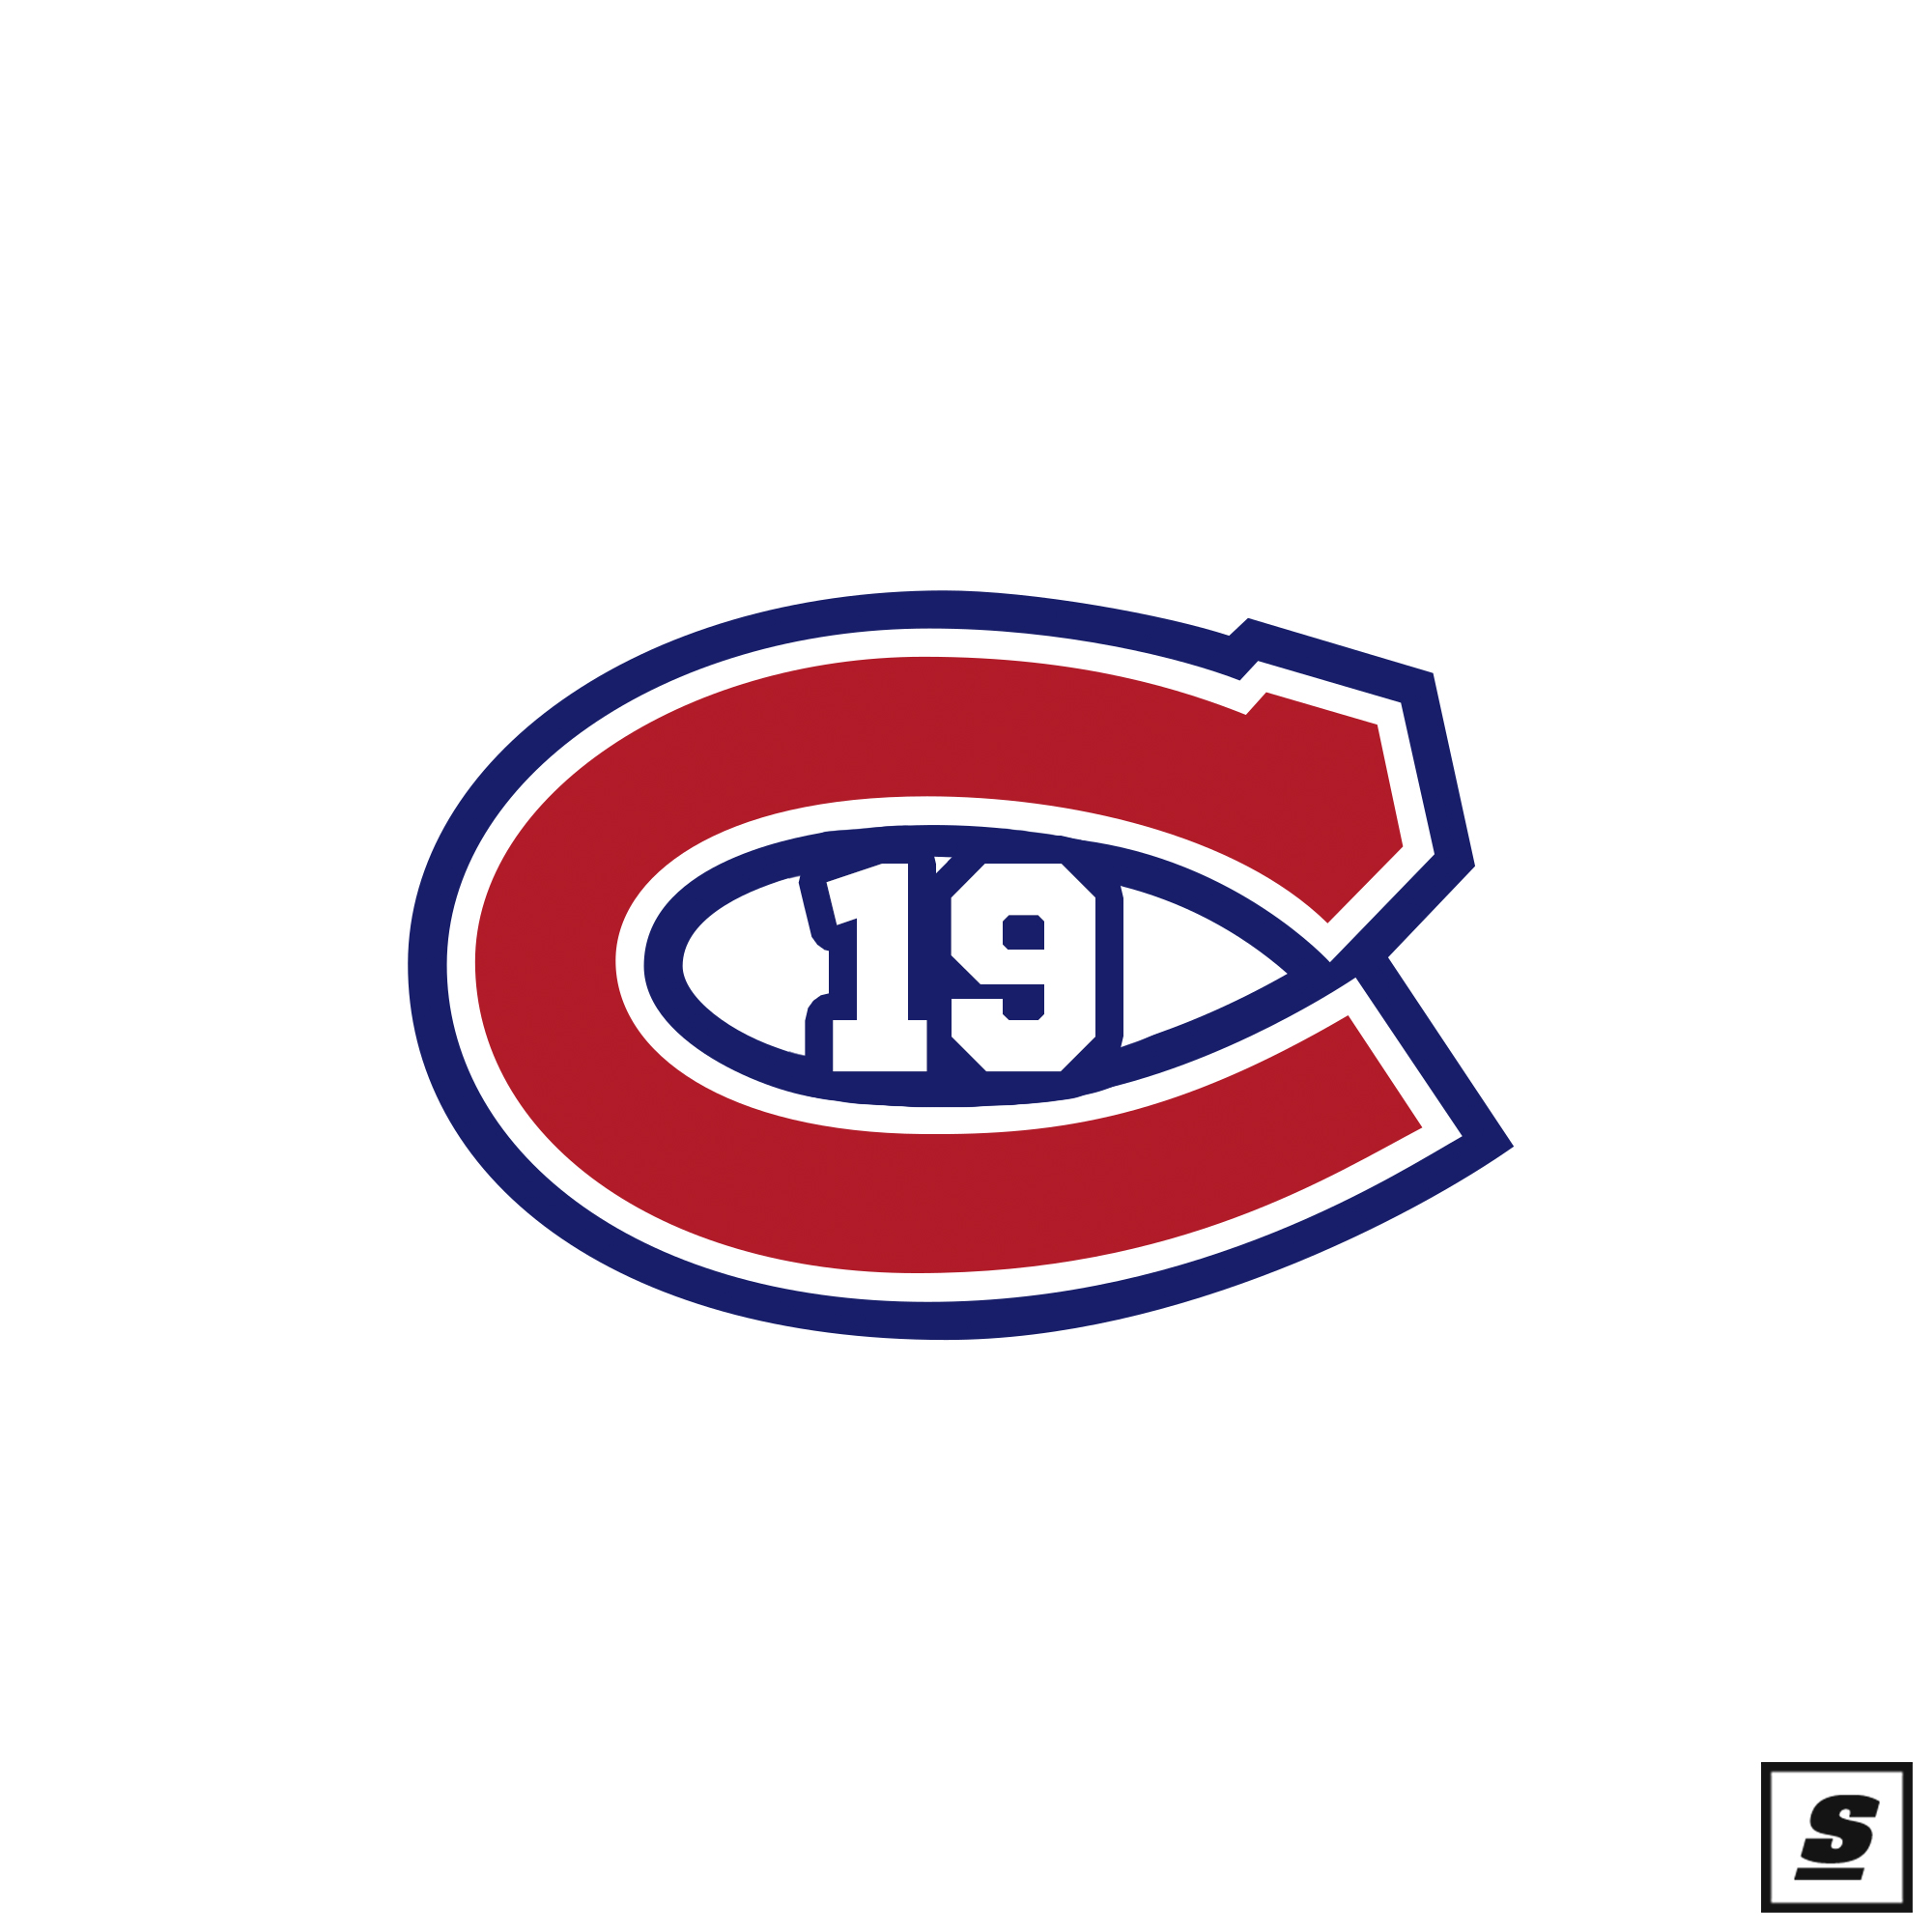 nhl scores montreal canadiens